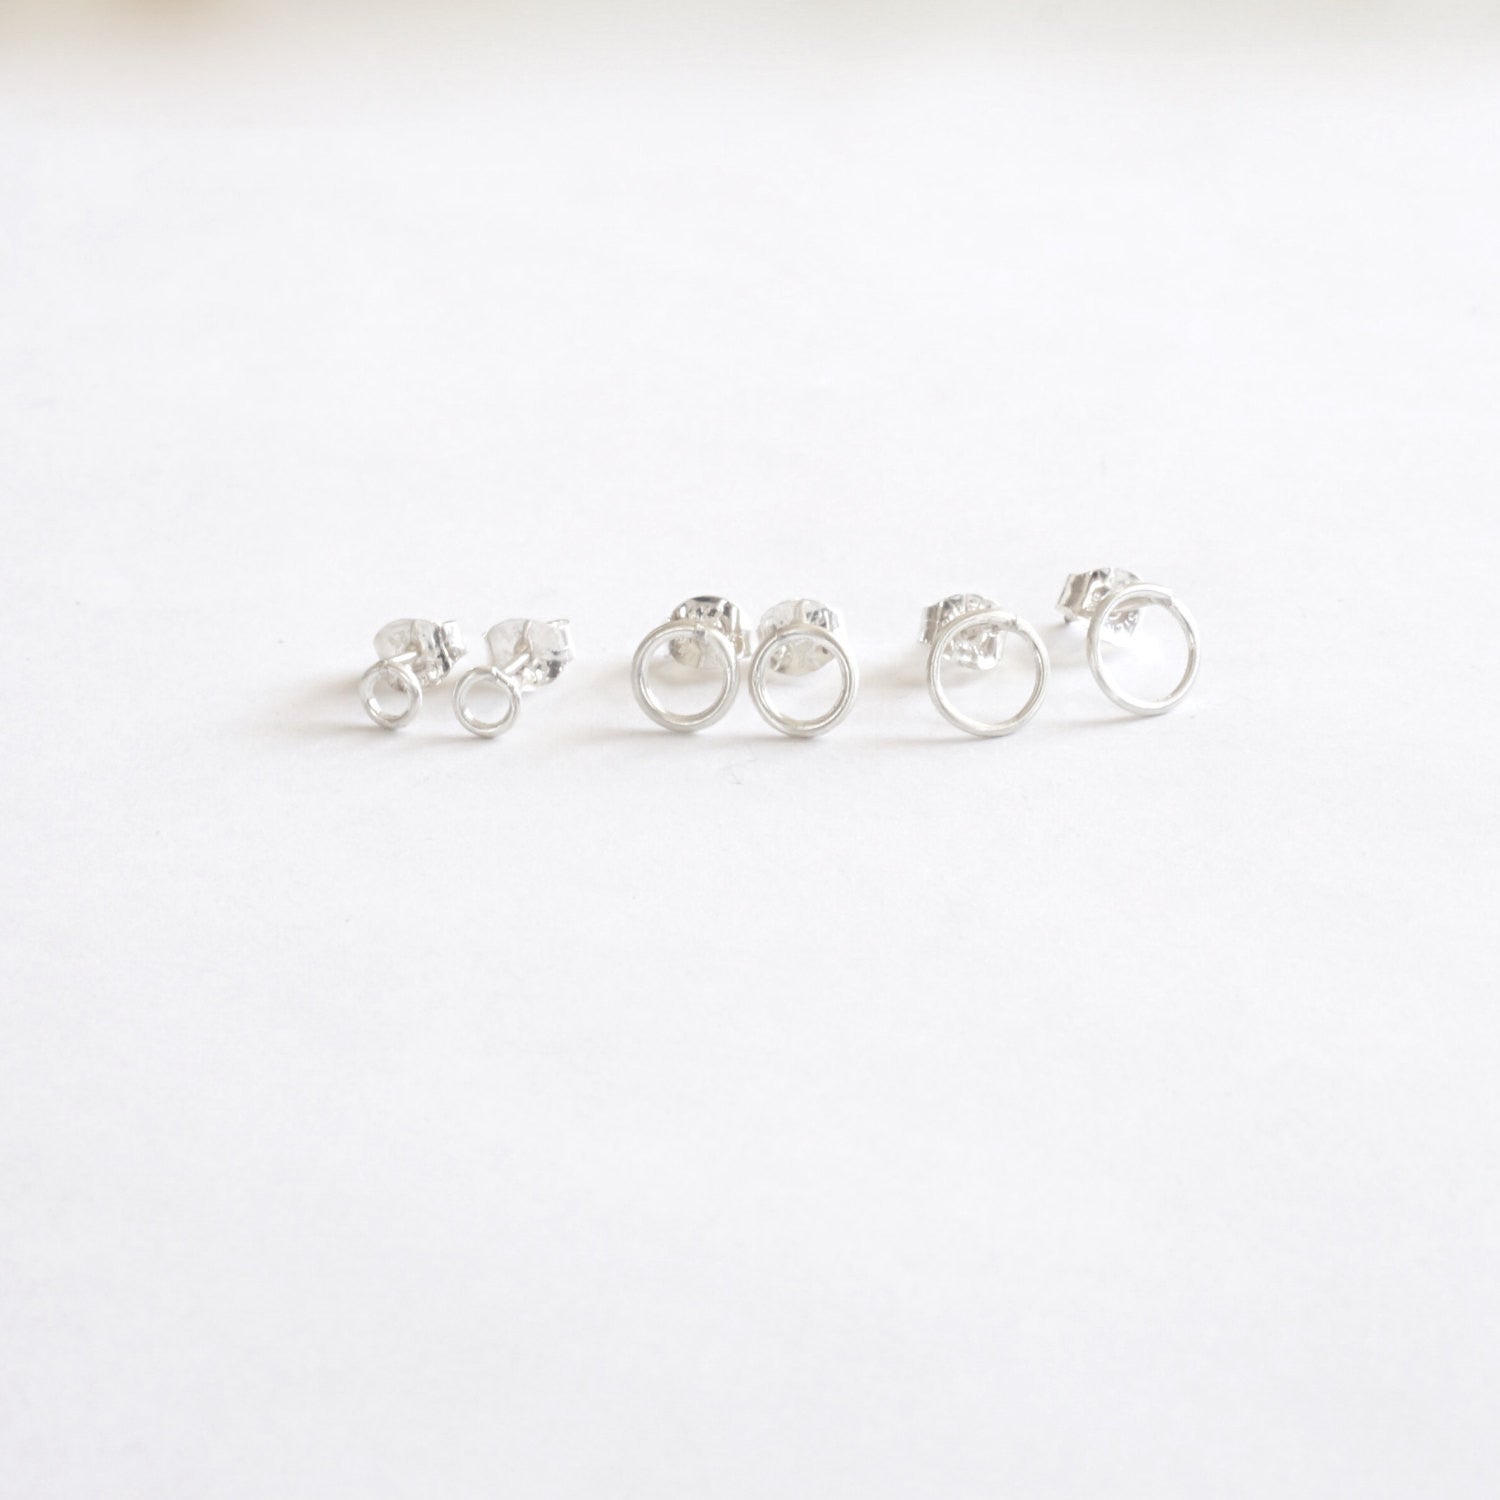 Classic and Stylish, Hand-Crafted Set of Three Small Open Circle Stud Earrings - 0208